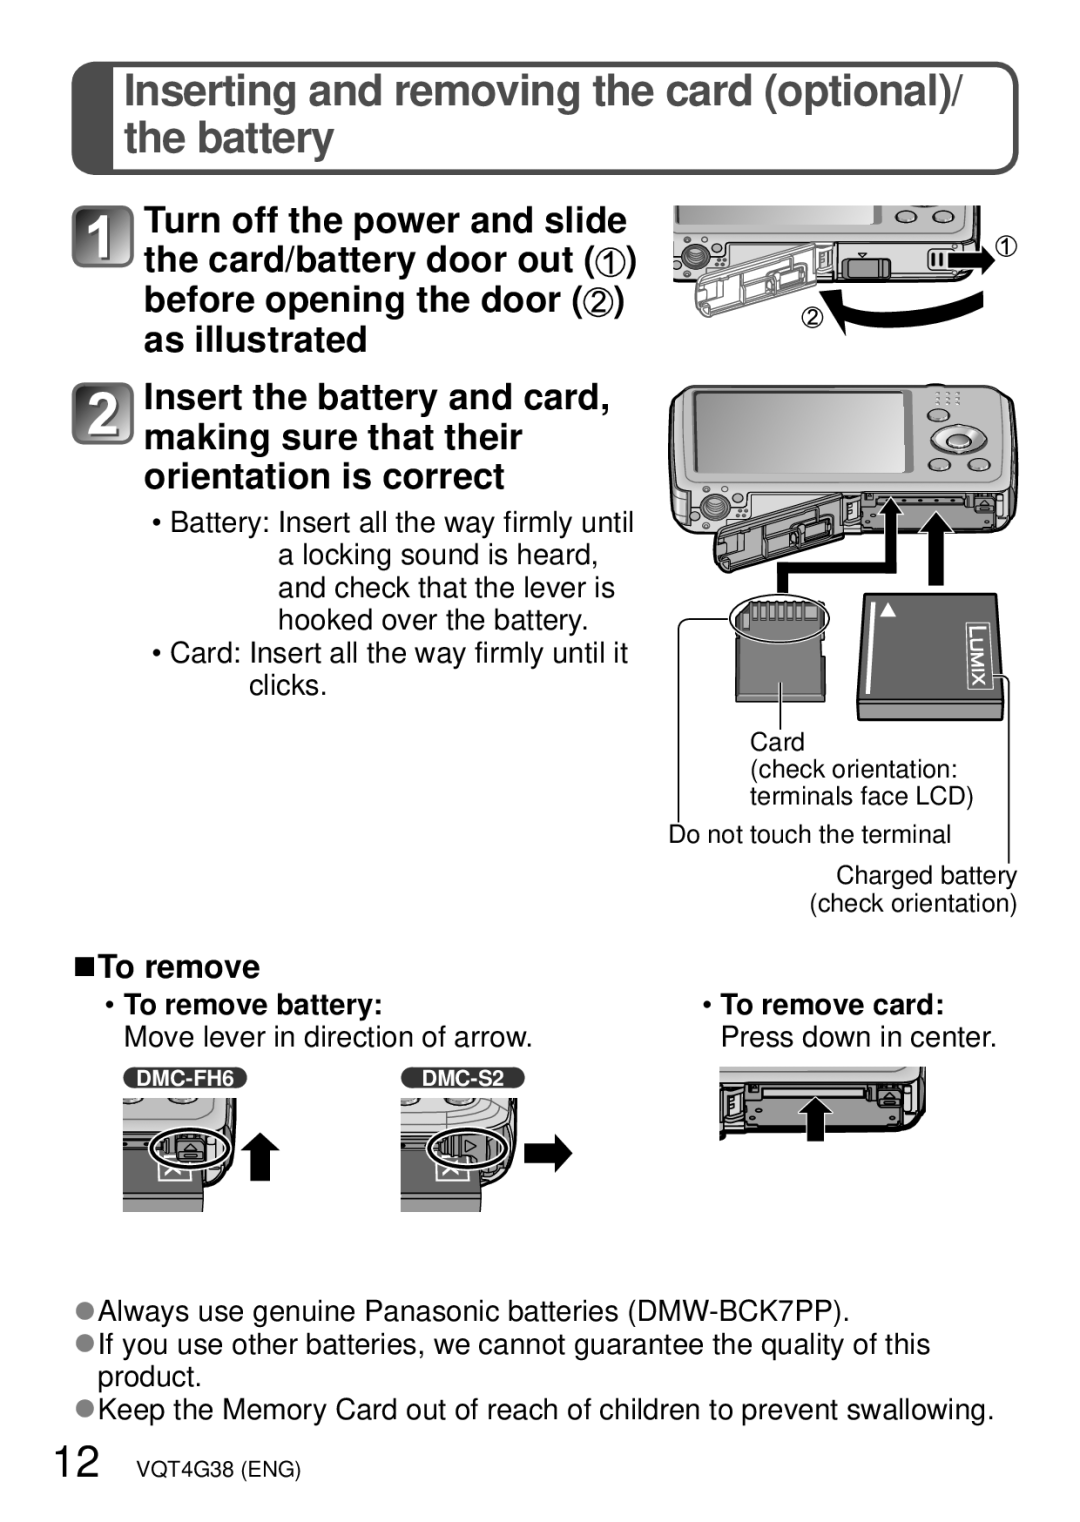 Panasonic M1211KZ0, DMC-S2V, DMC-S2K, DMC-FH6K, VQT4G38 Inserting and removing the card optional/ the battery, To remove 